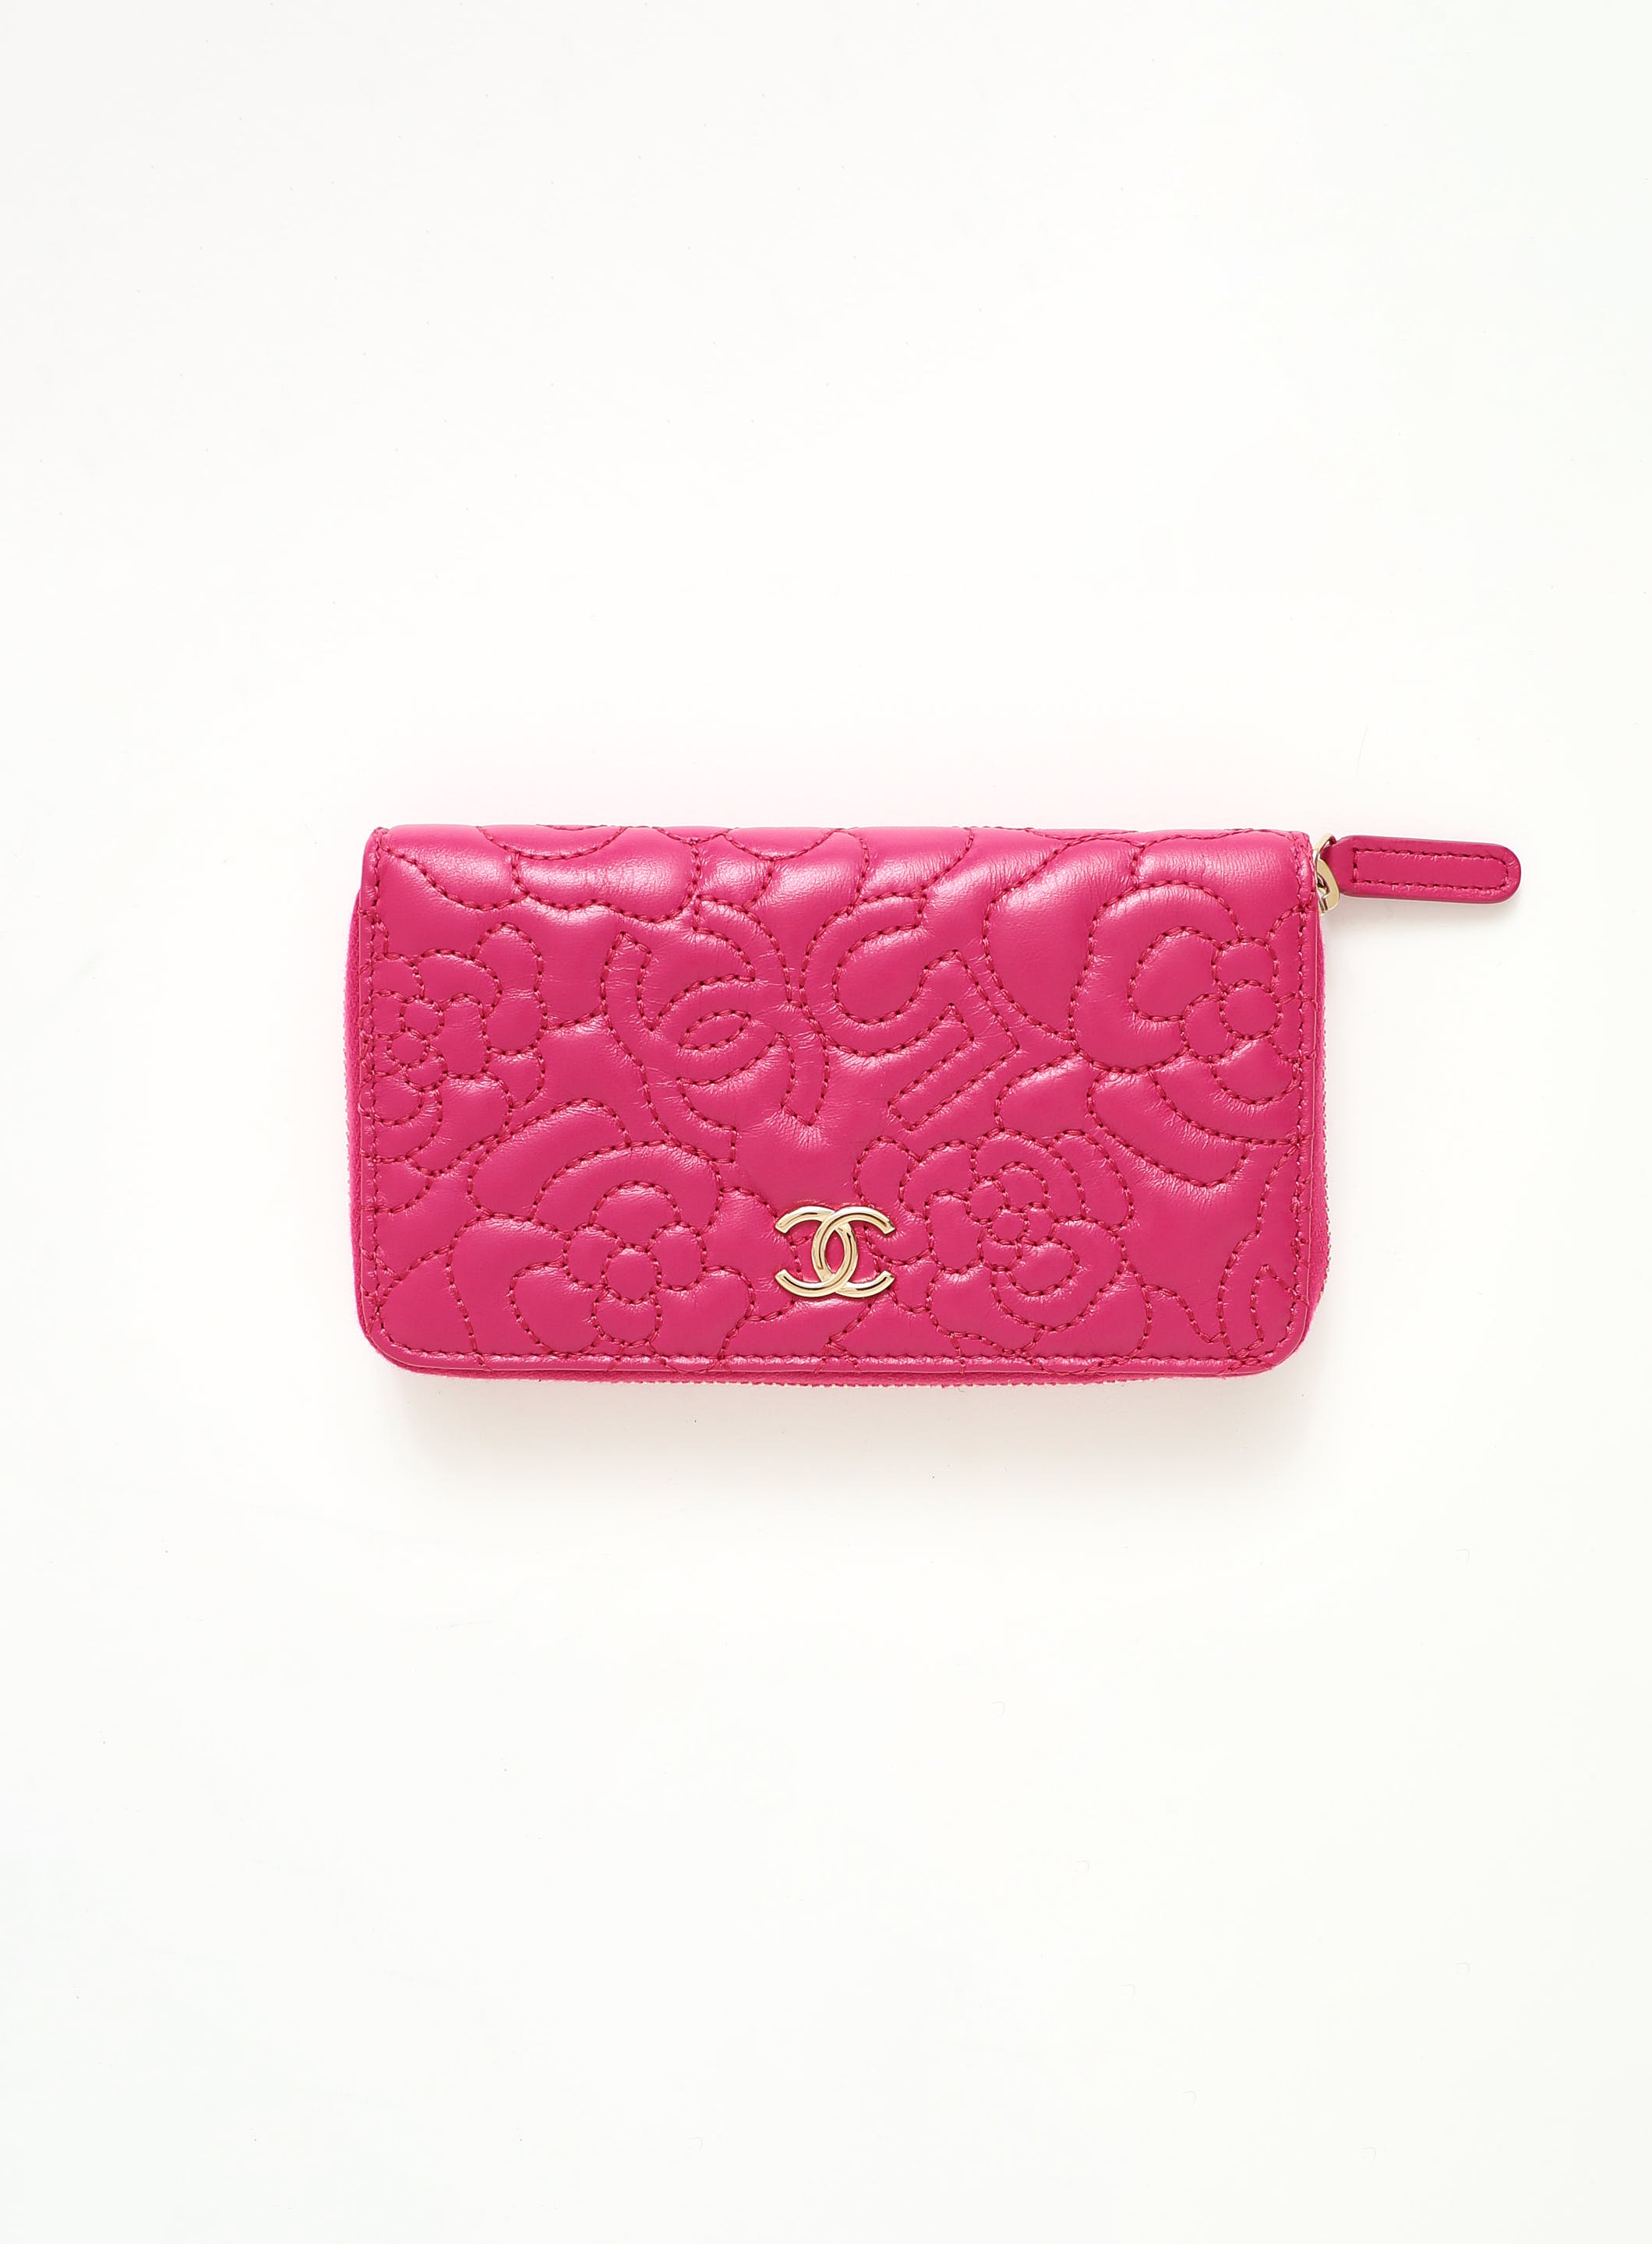 Karl Lagerfeld - Authenticated Clutch Bag - Leather Pink for Women, Very Good Condition